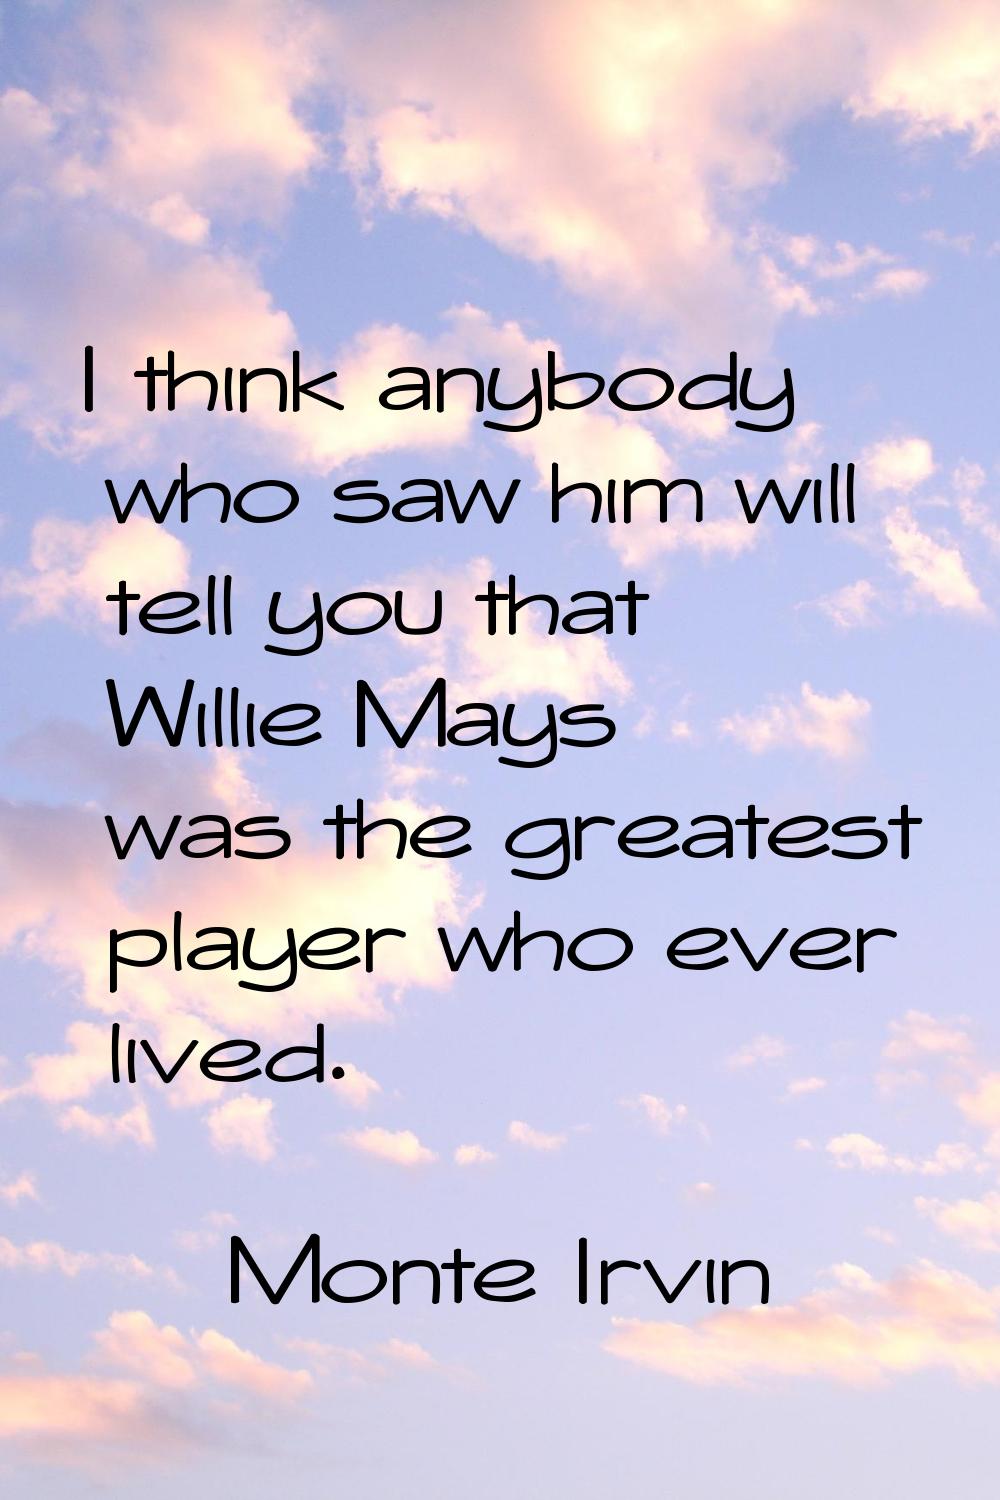 I think anybody who saw him will tell you that Willie Mays was the greatest player who ever lived.